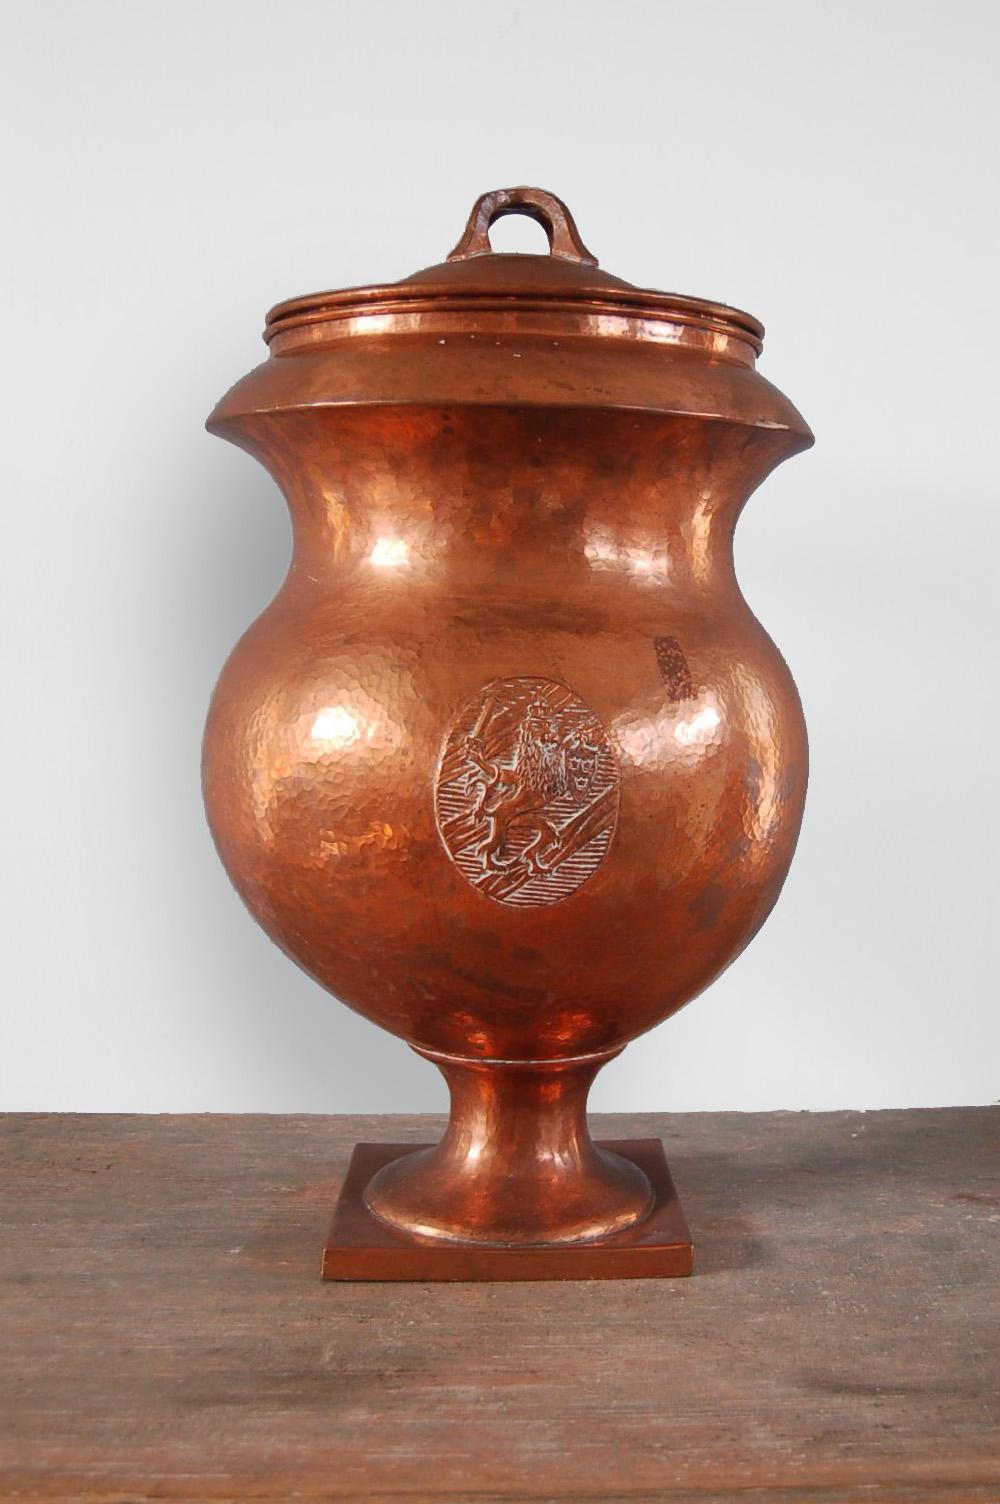 Baltic Large Hammered Copper Covered Urn with Coat of Arms/Lions, Swedish, circa 1820